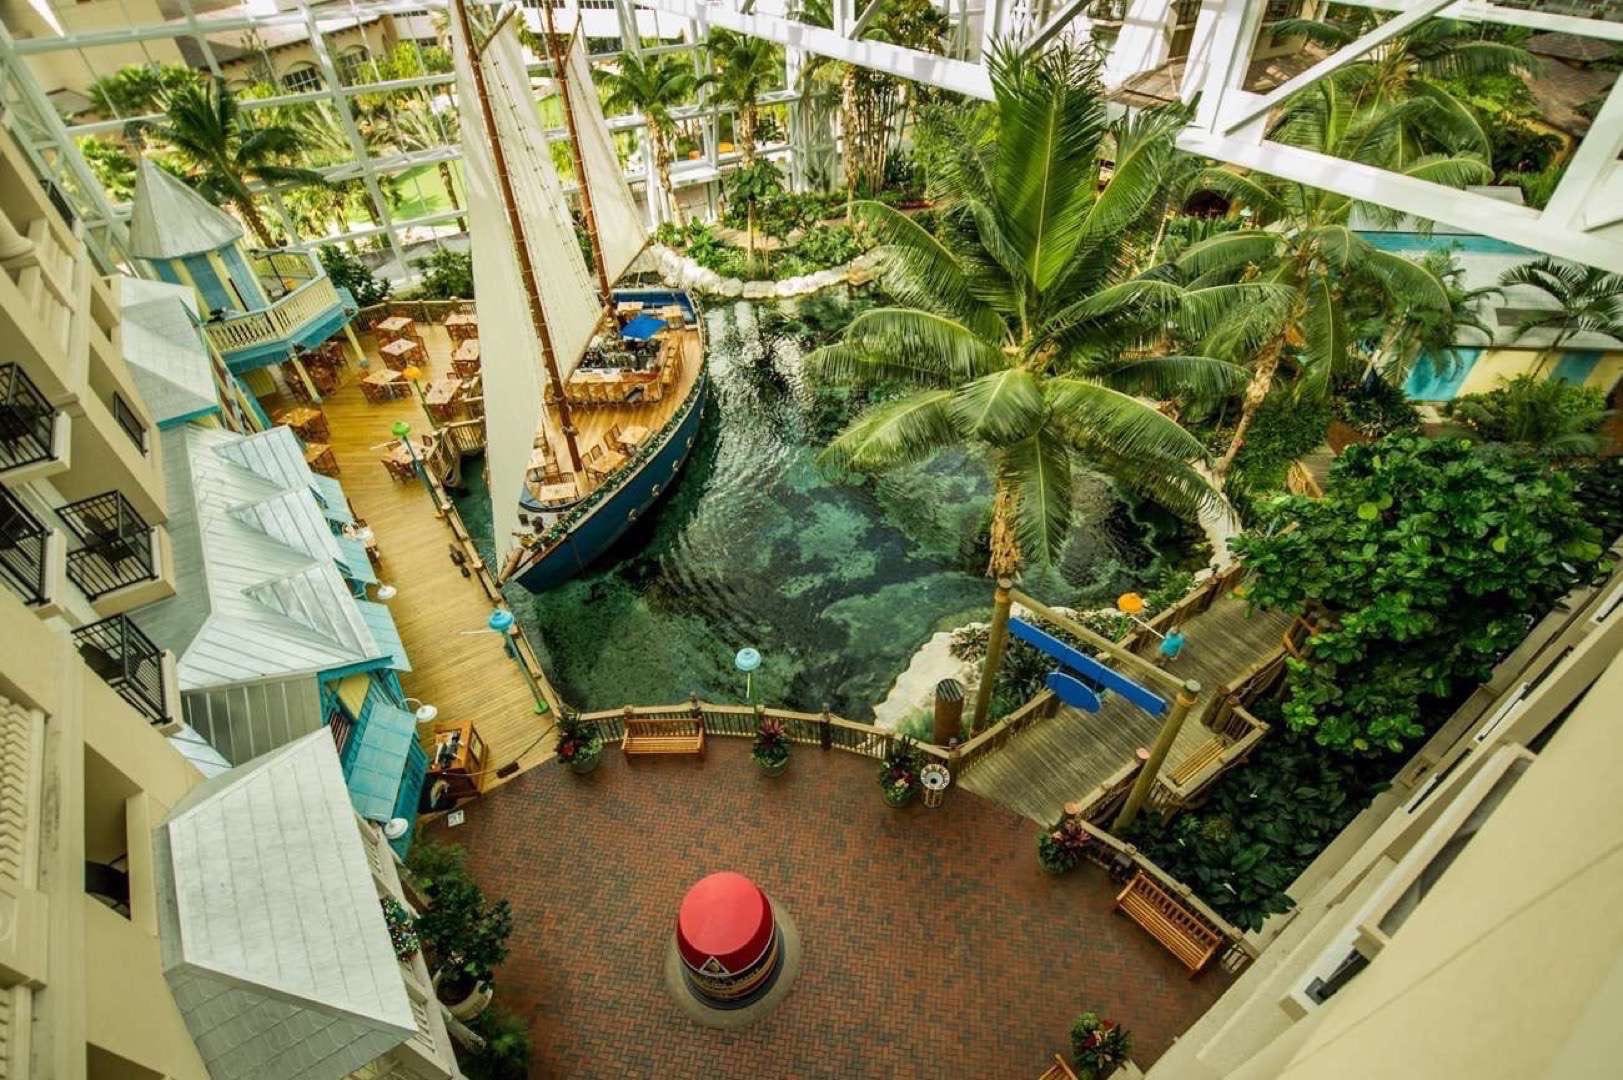 IU C&I Studios Portfolio Gaylord Palms Resort and Convention Center Overhead view of Interior showing a marine themed area with a small ship, walkways, marker, palm trees and trees.